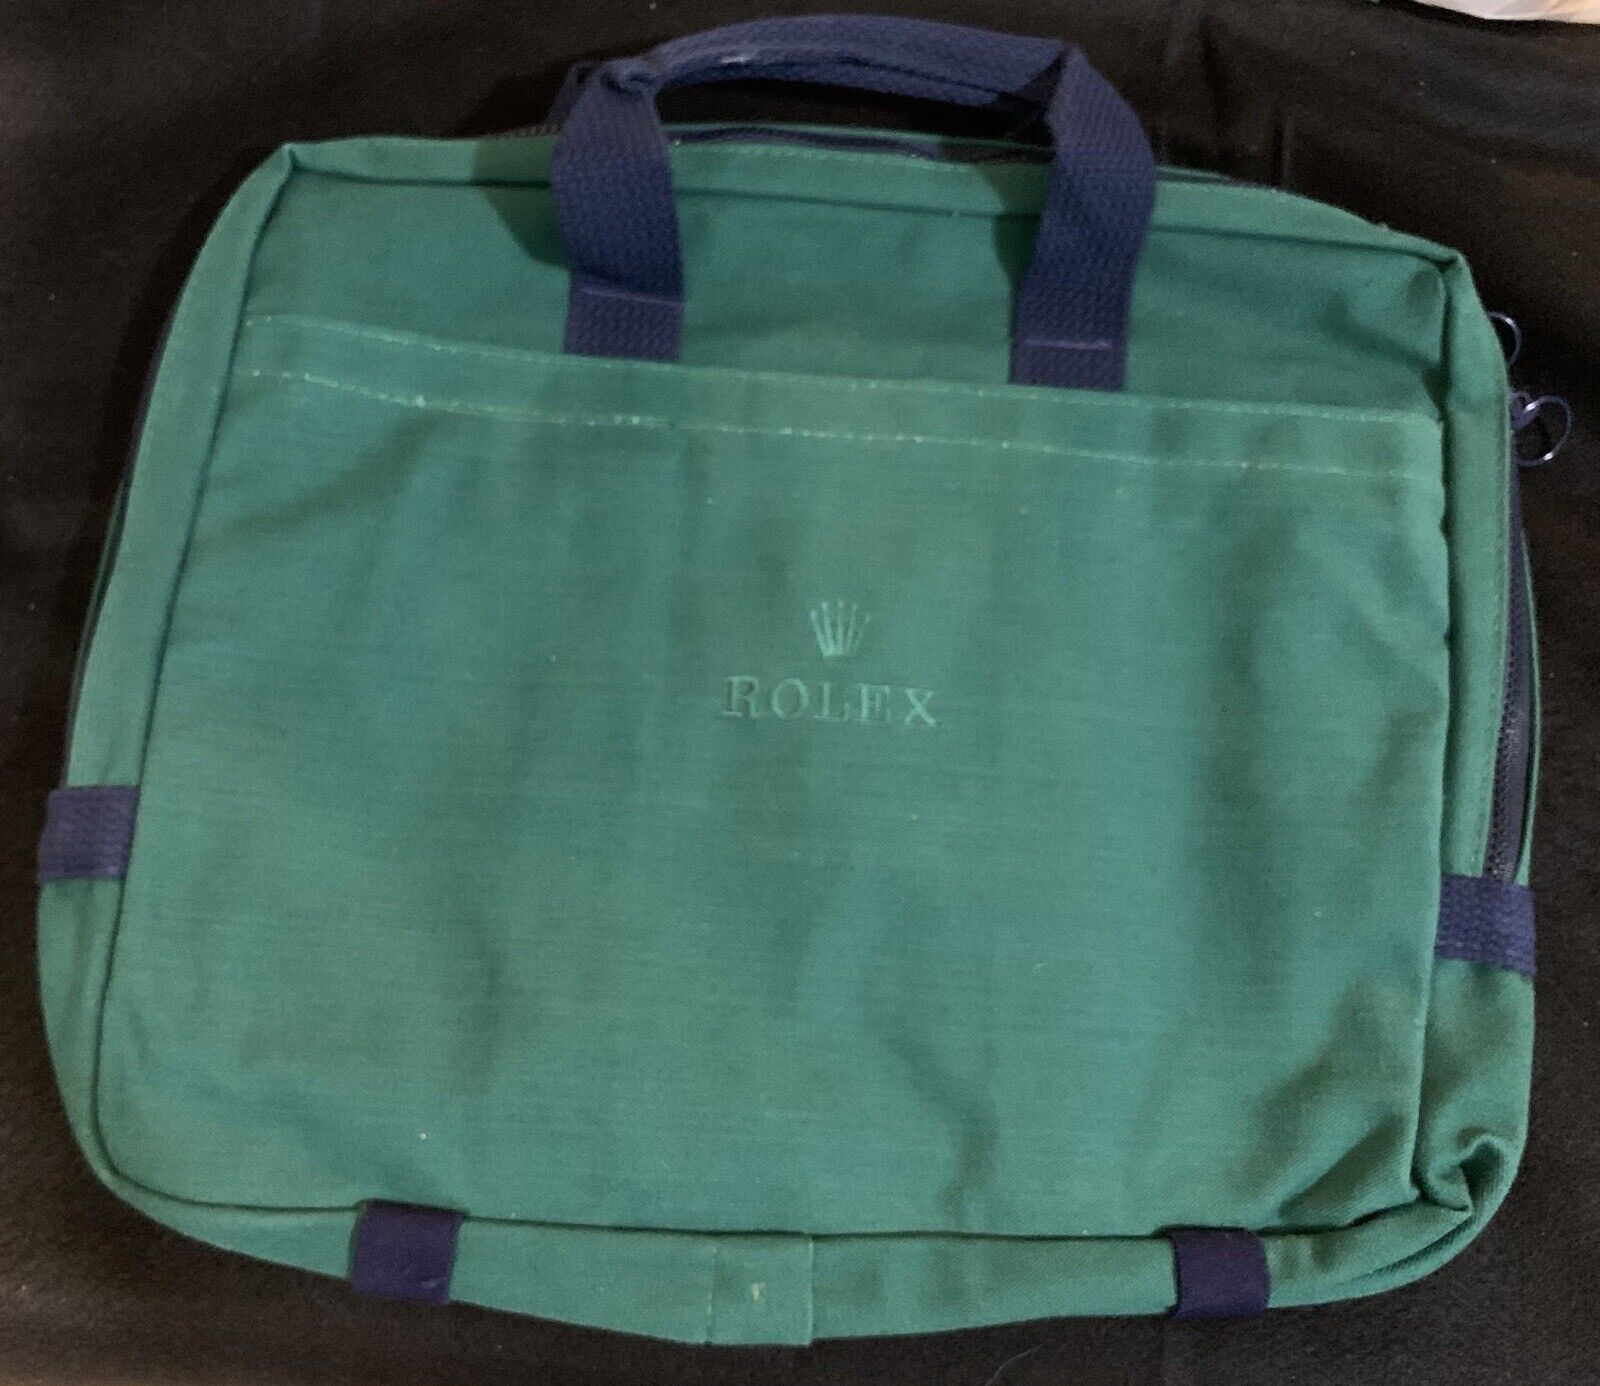 Rolex green canvas briefcase made in the USA by Ha-Lo Industries in the 90s